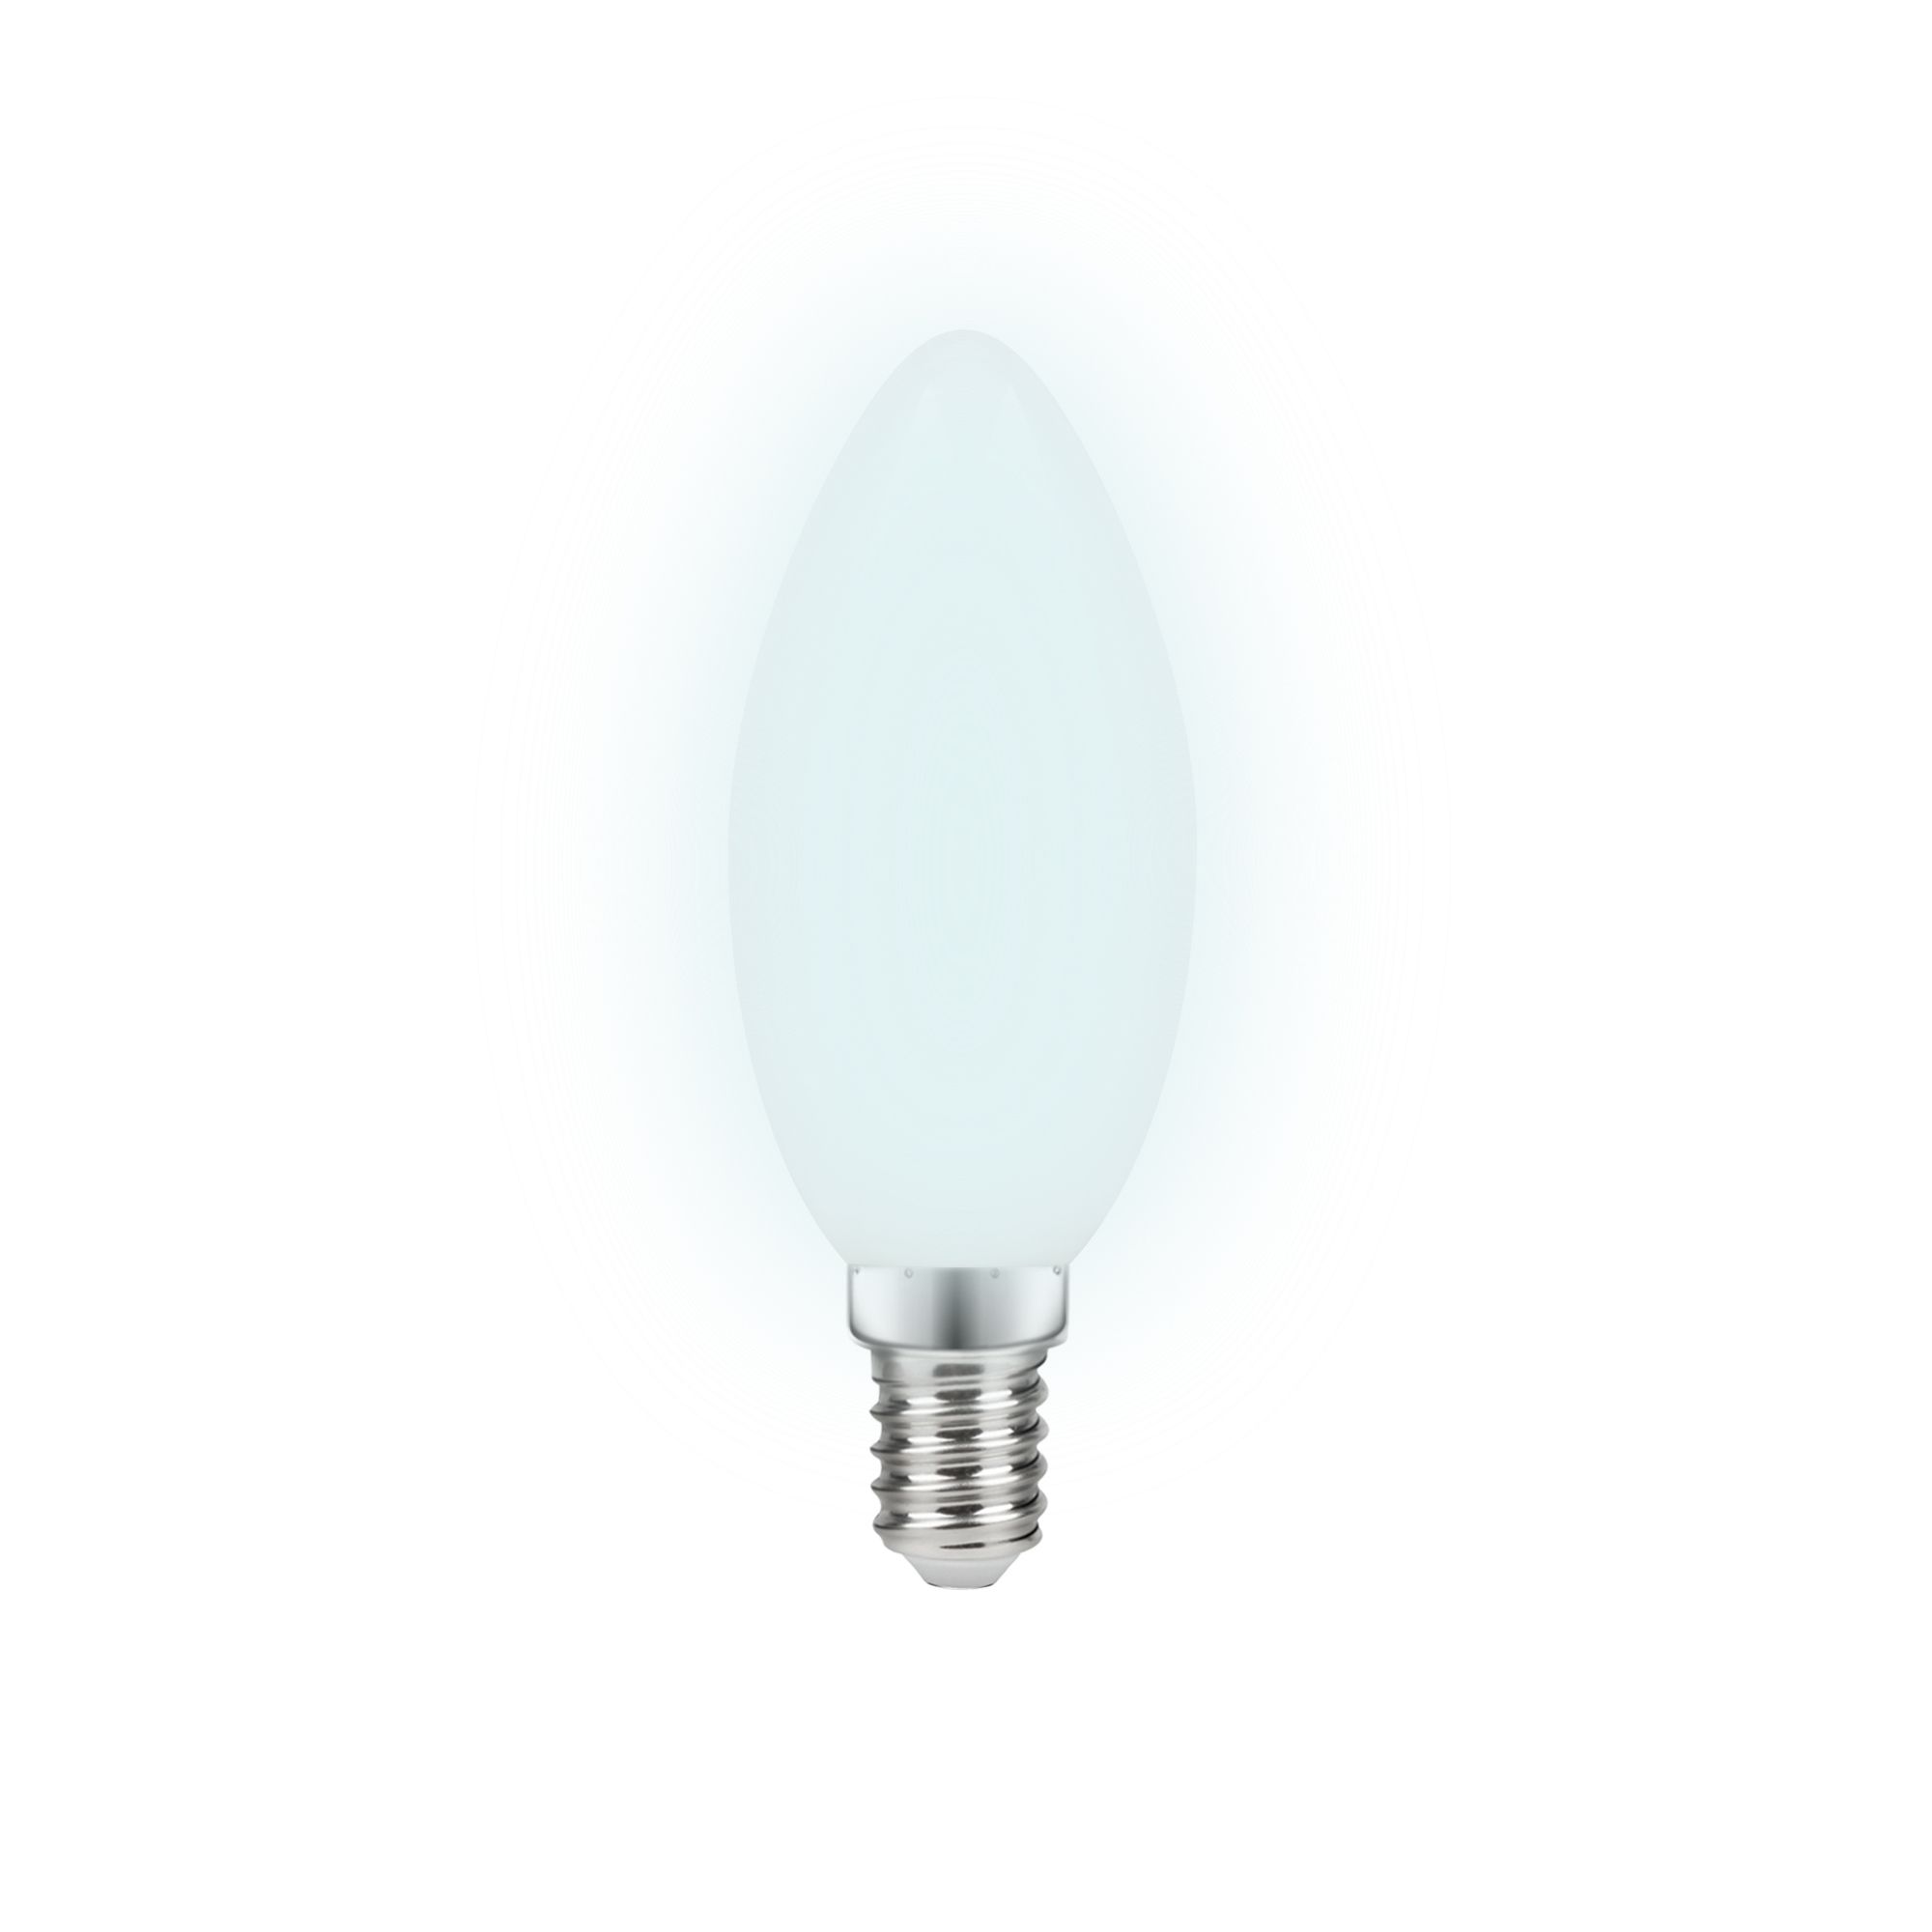 Diall Relax & Work E14 4.6W 470lm Candle Warm white & neutral white LED Filament Light bulb